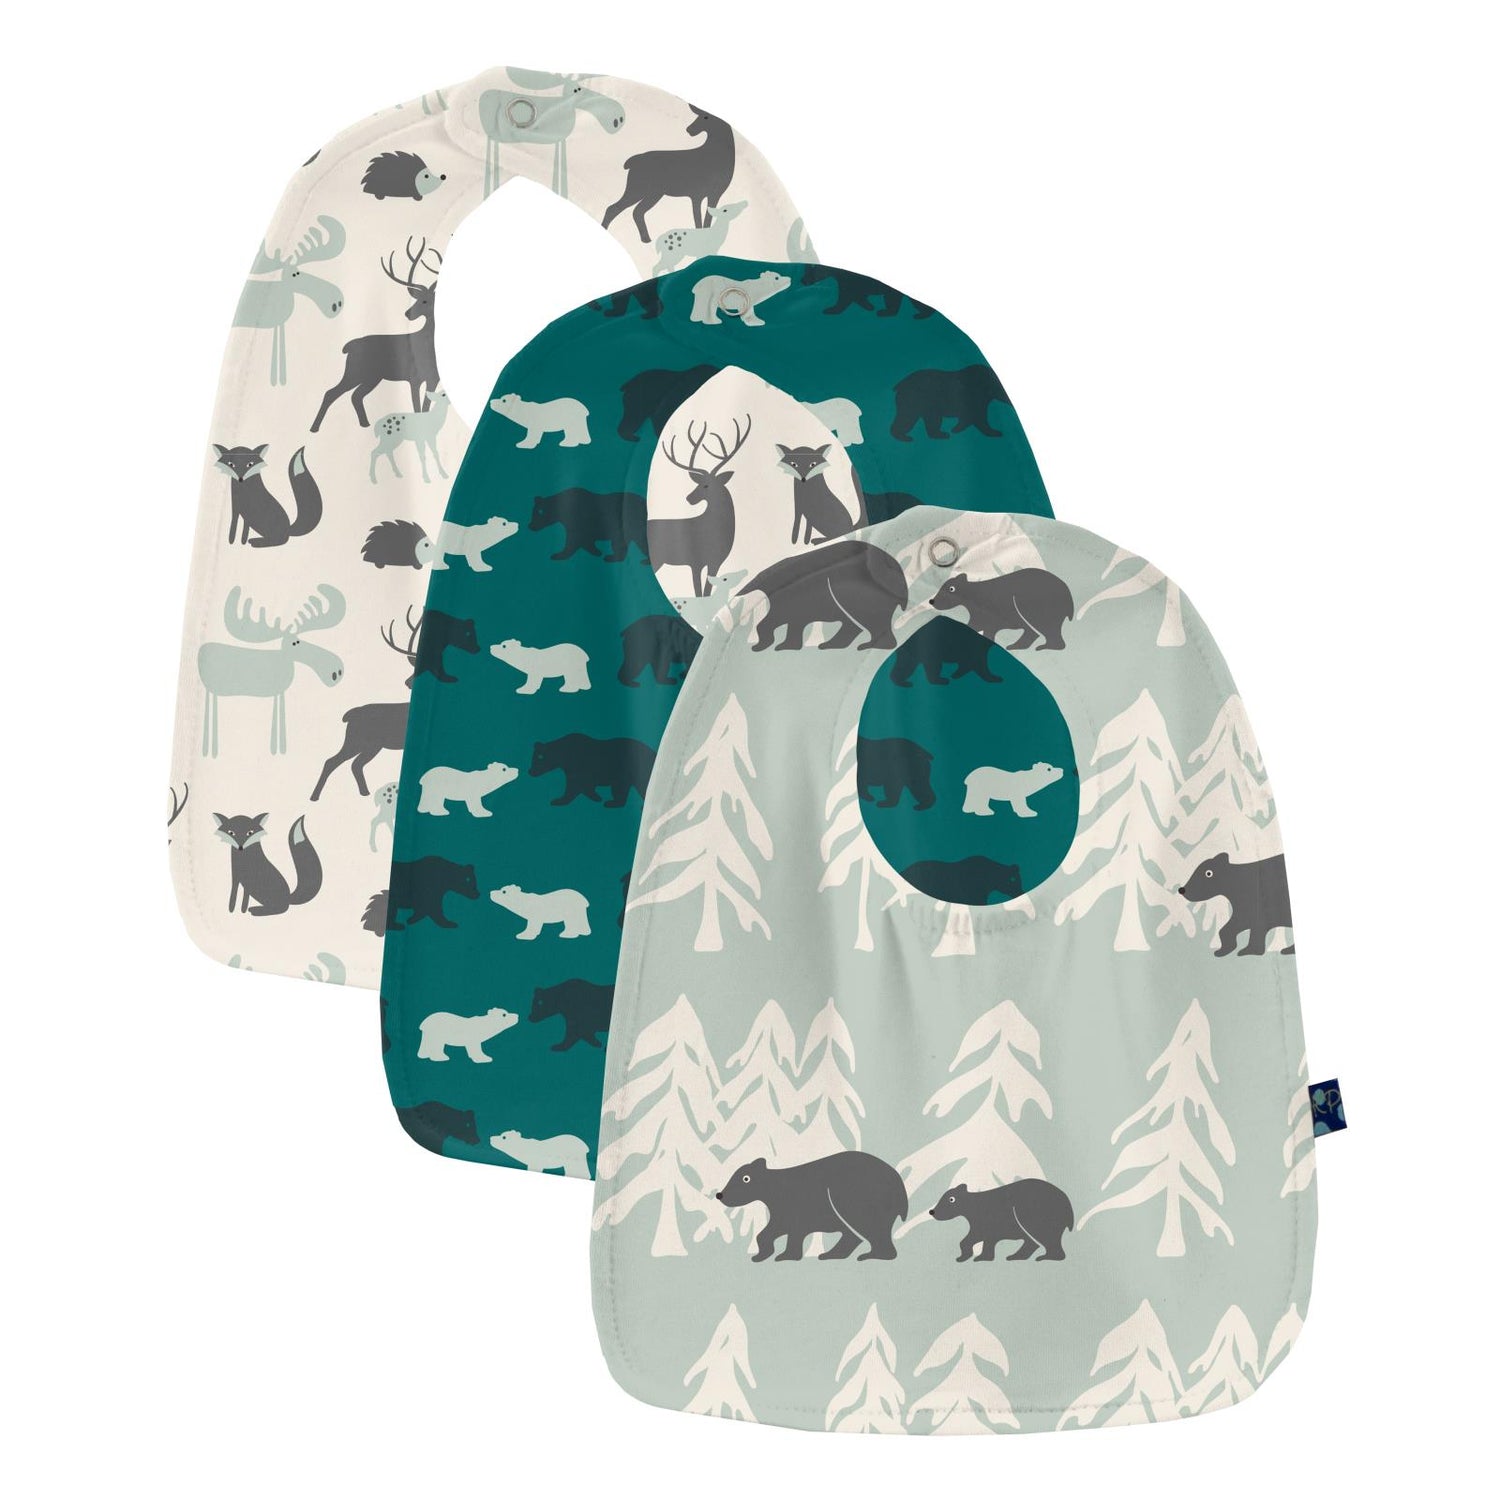 Print Bib Set of 3 in Natural Forest Animals, Cedar Brown Bear & Aloe Bears and Trees